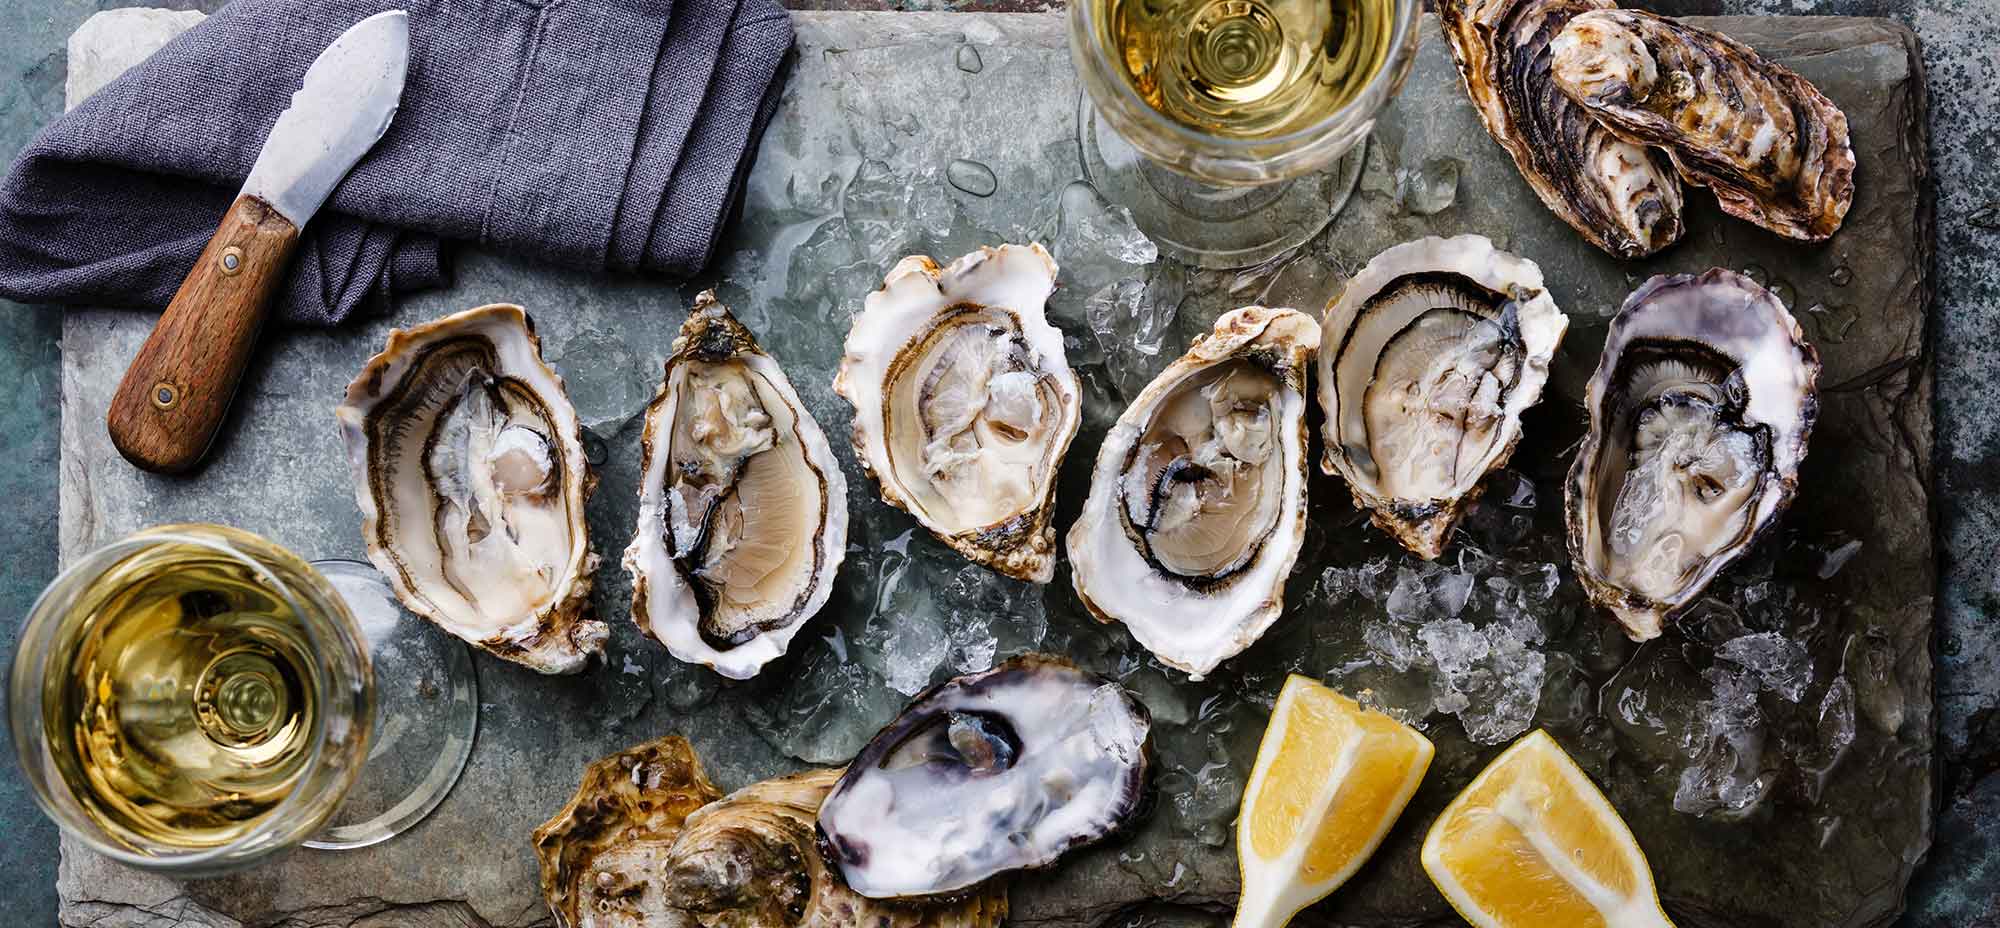 Image is of oysters ready to be served